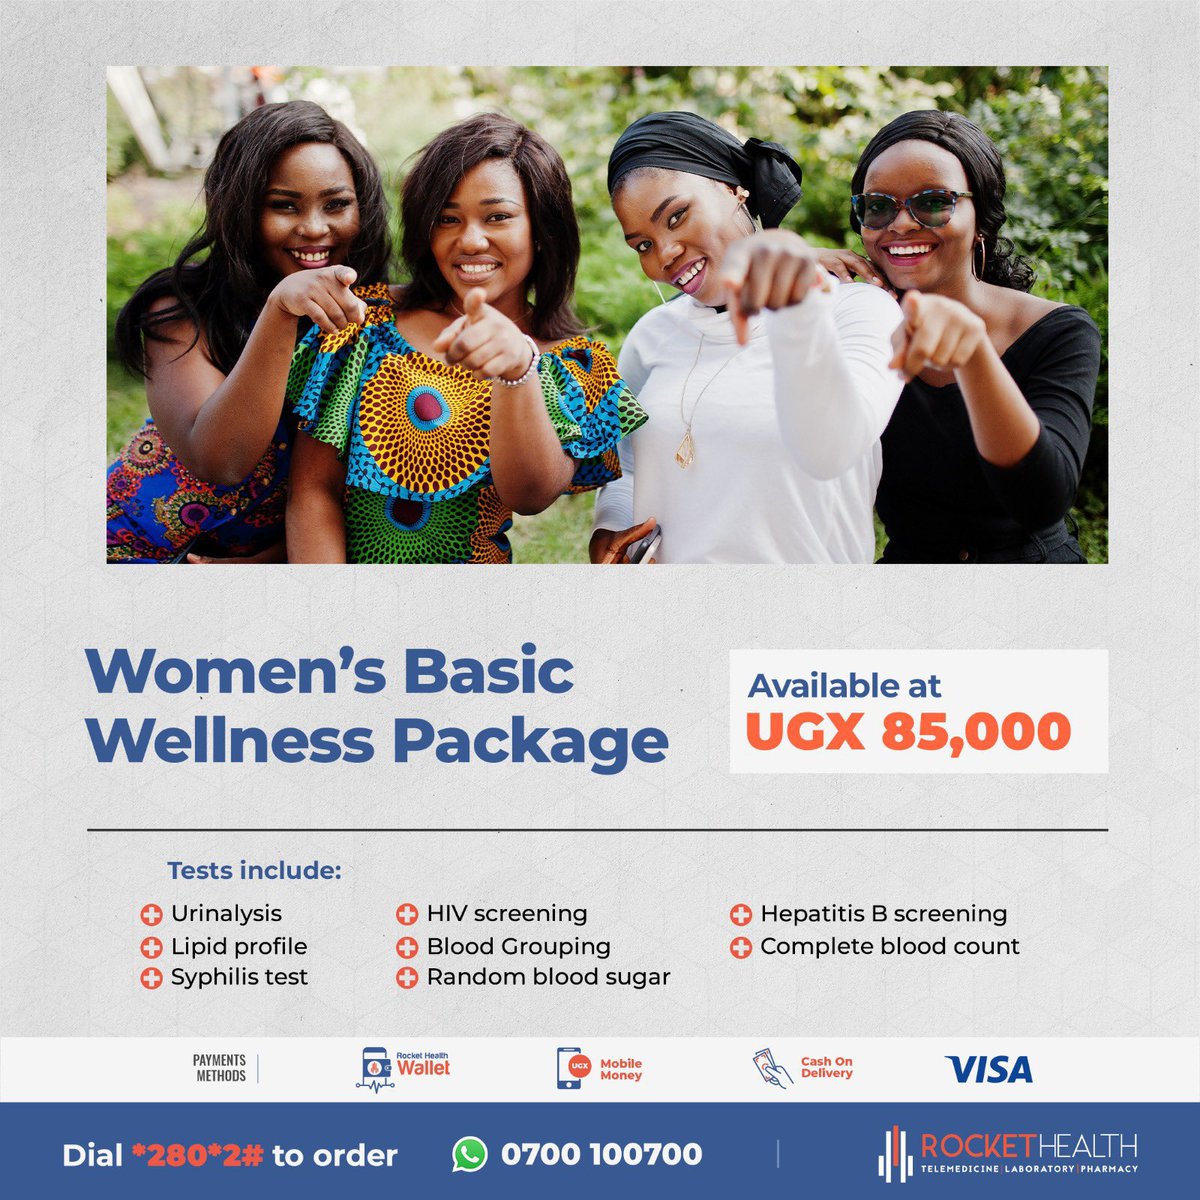 March (Women’s month) is coming to an end! Haven’t ordered wellness checks for that significant woman in your life? it’s not too late to 📲dial *280*2#. #RocketHealthWomensMonth